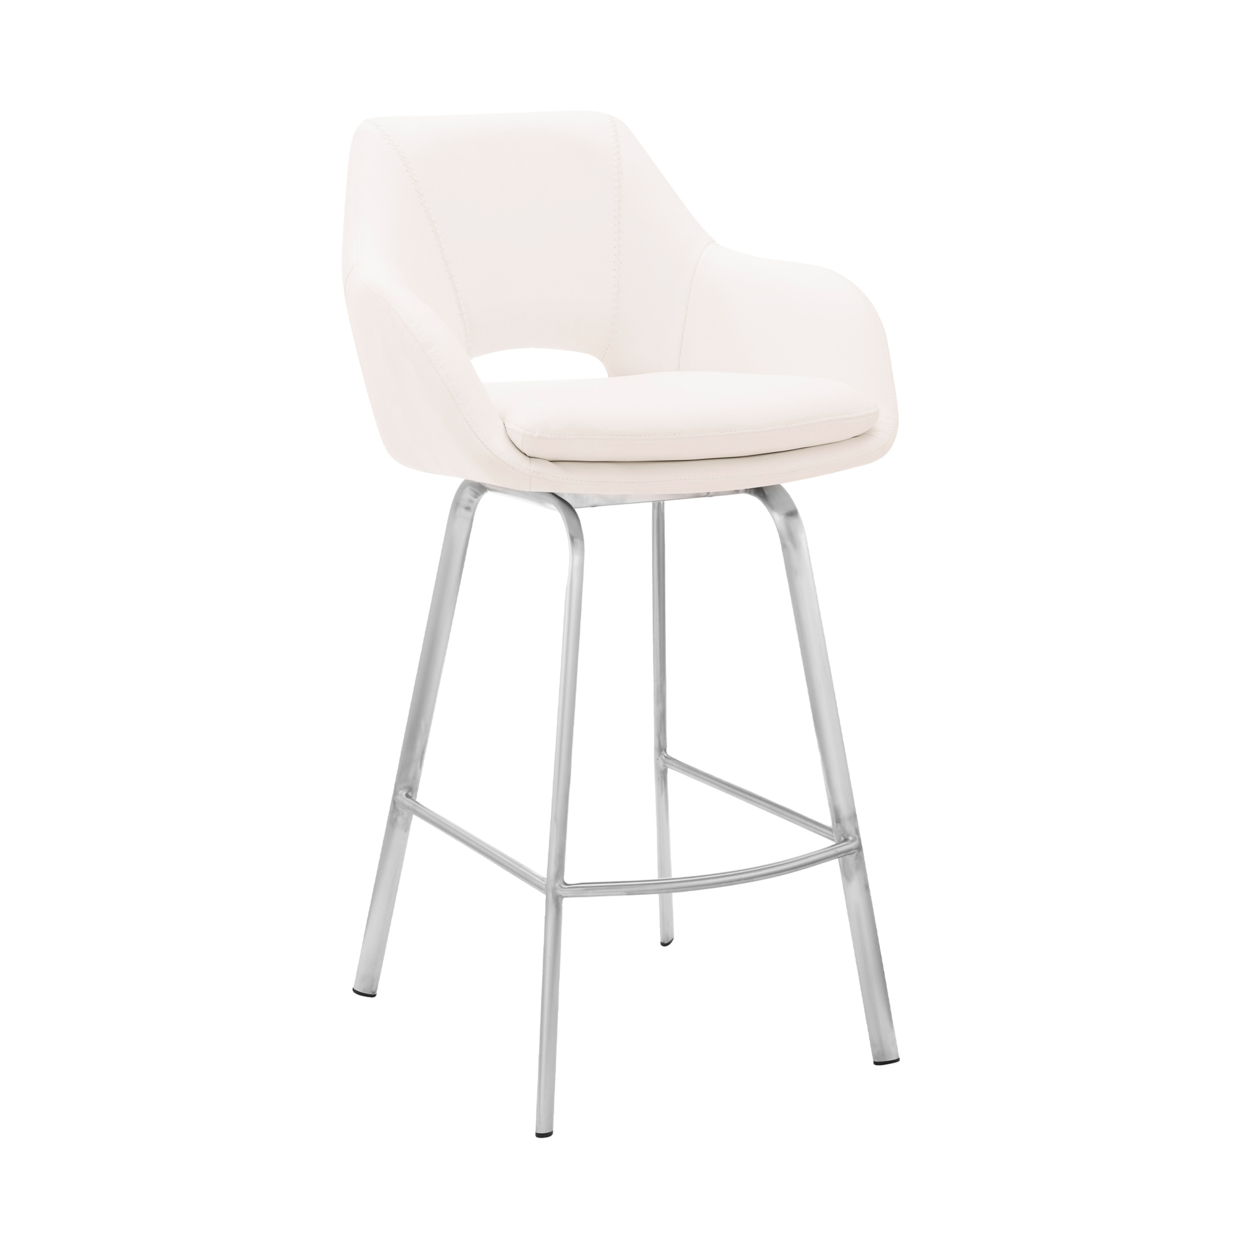 30 Inch Leatherette And Metal Swivel Bar Stool, White And Silver- Saltoro Sherpi